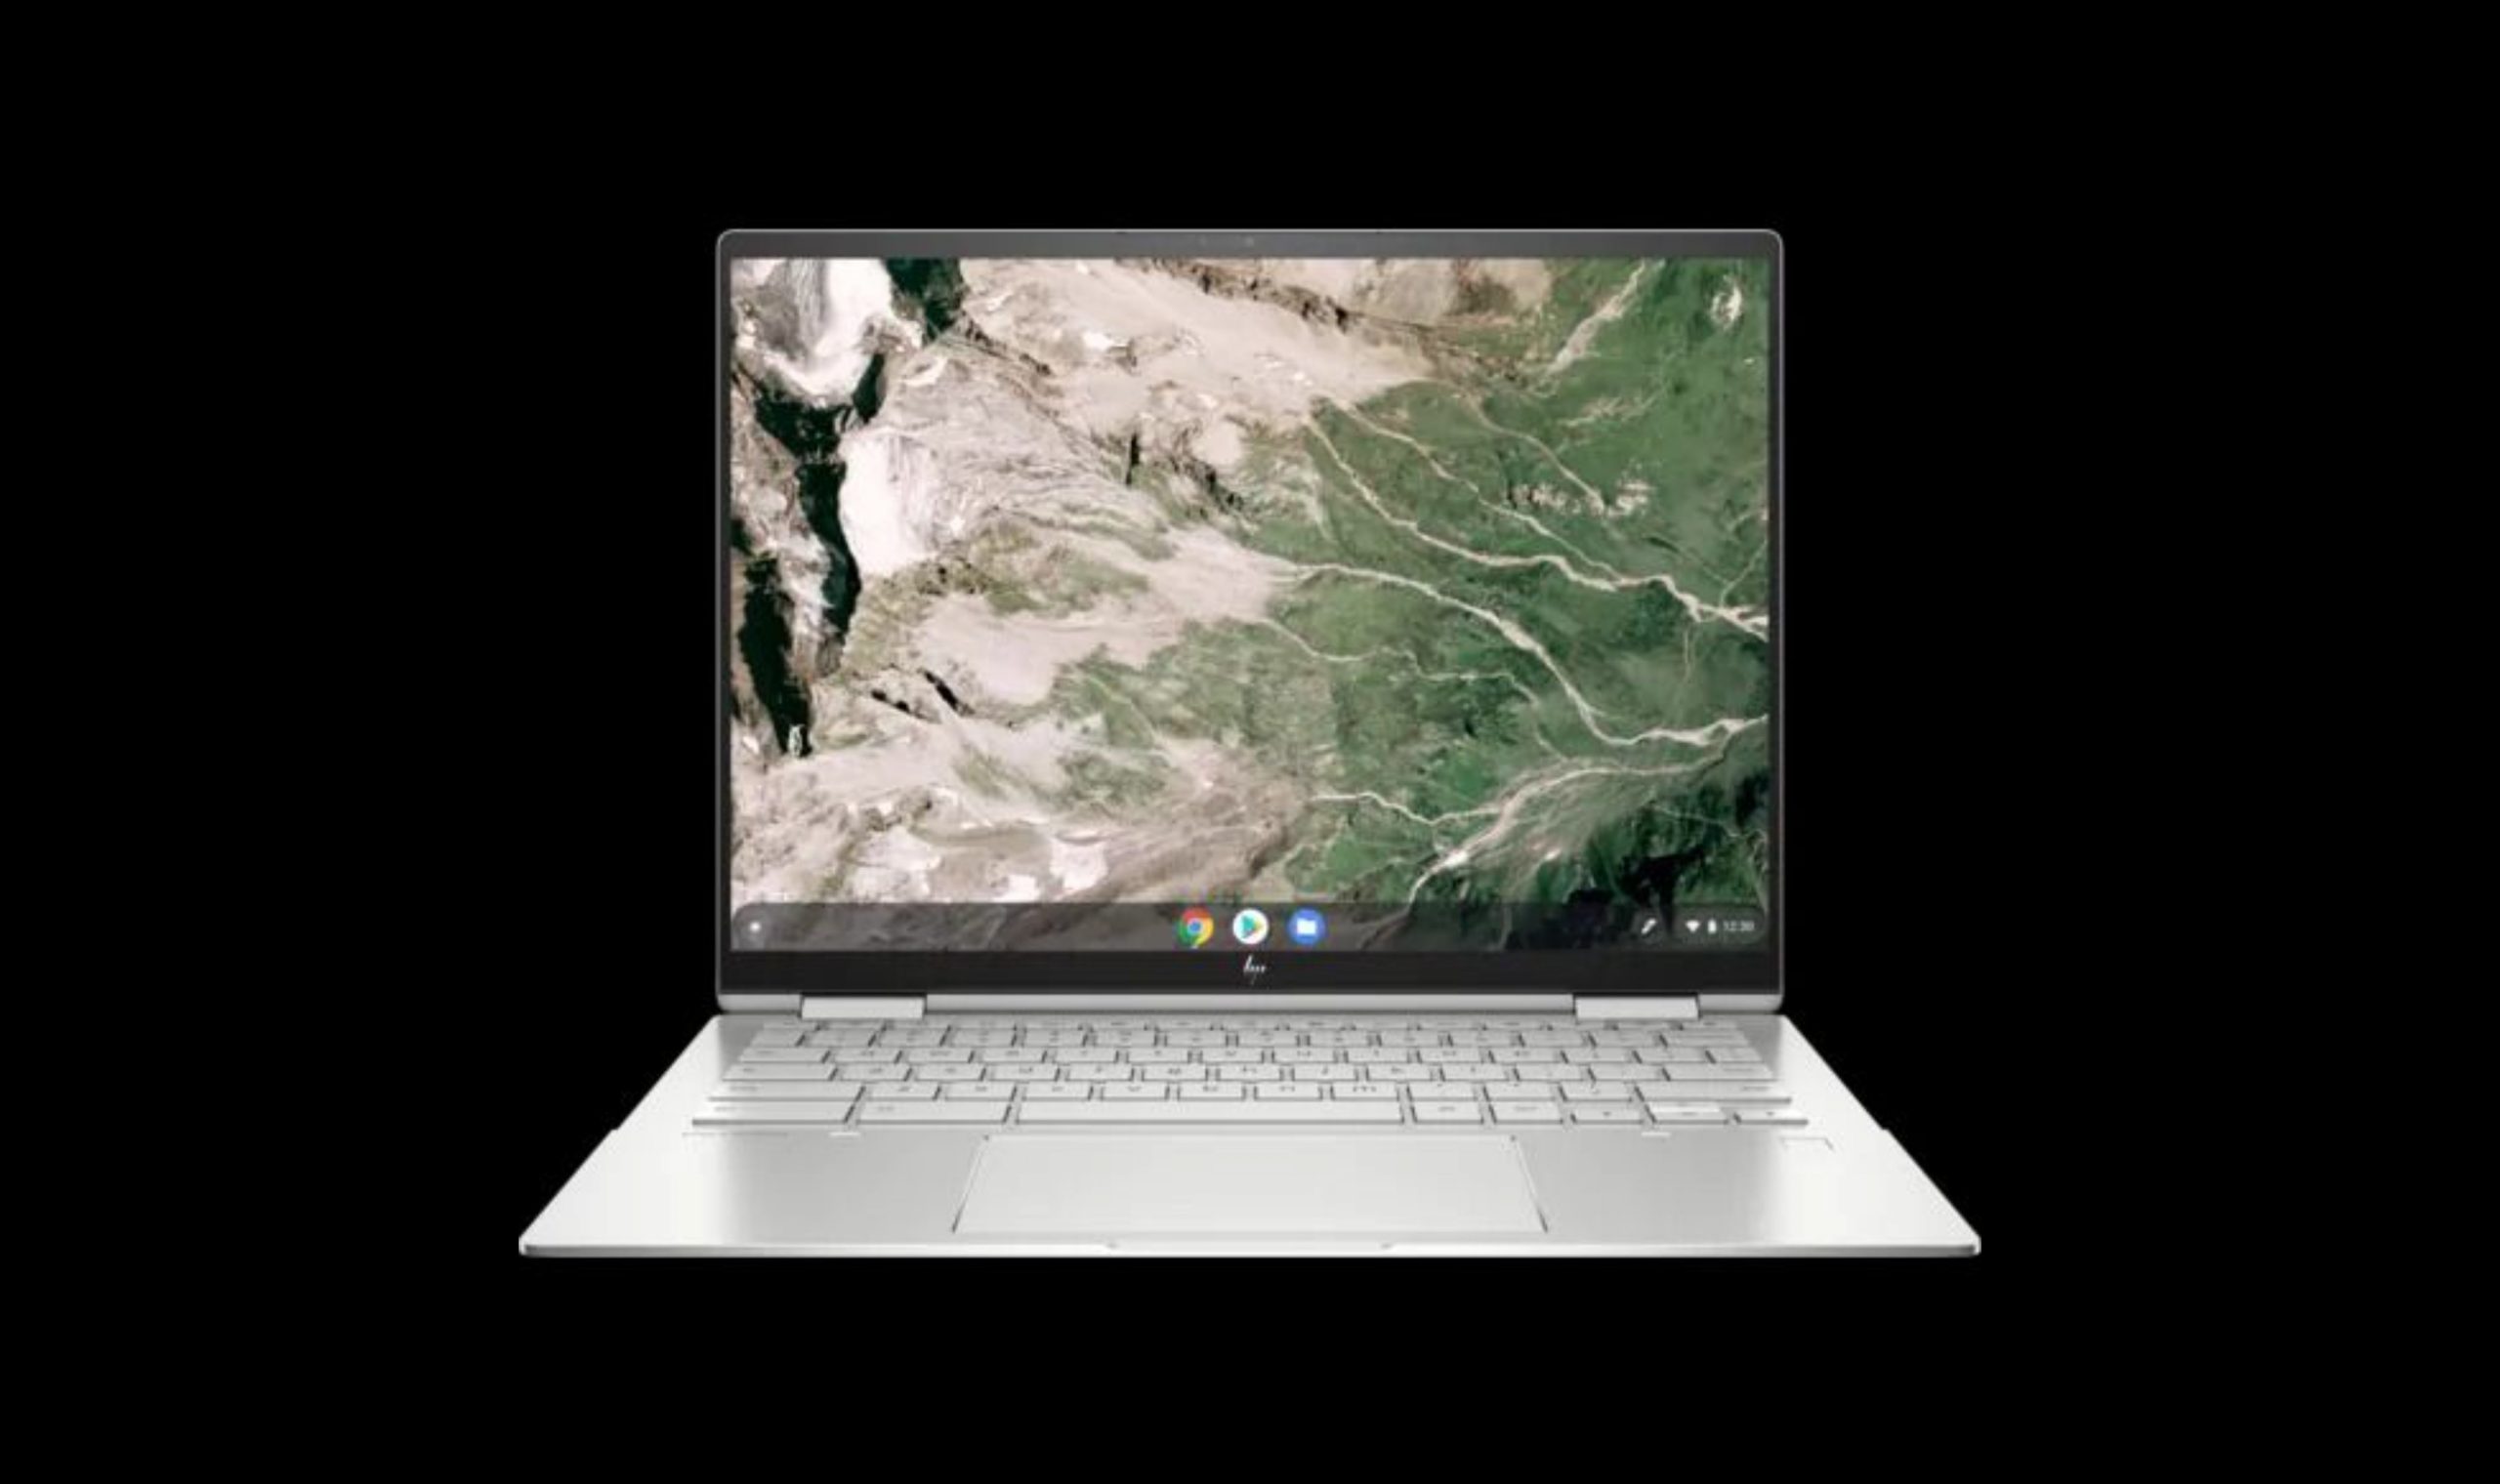 Chromebooks performed exceptionally well in Q3 2020 by growing 122% YoY